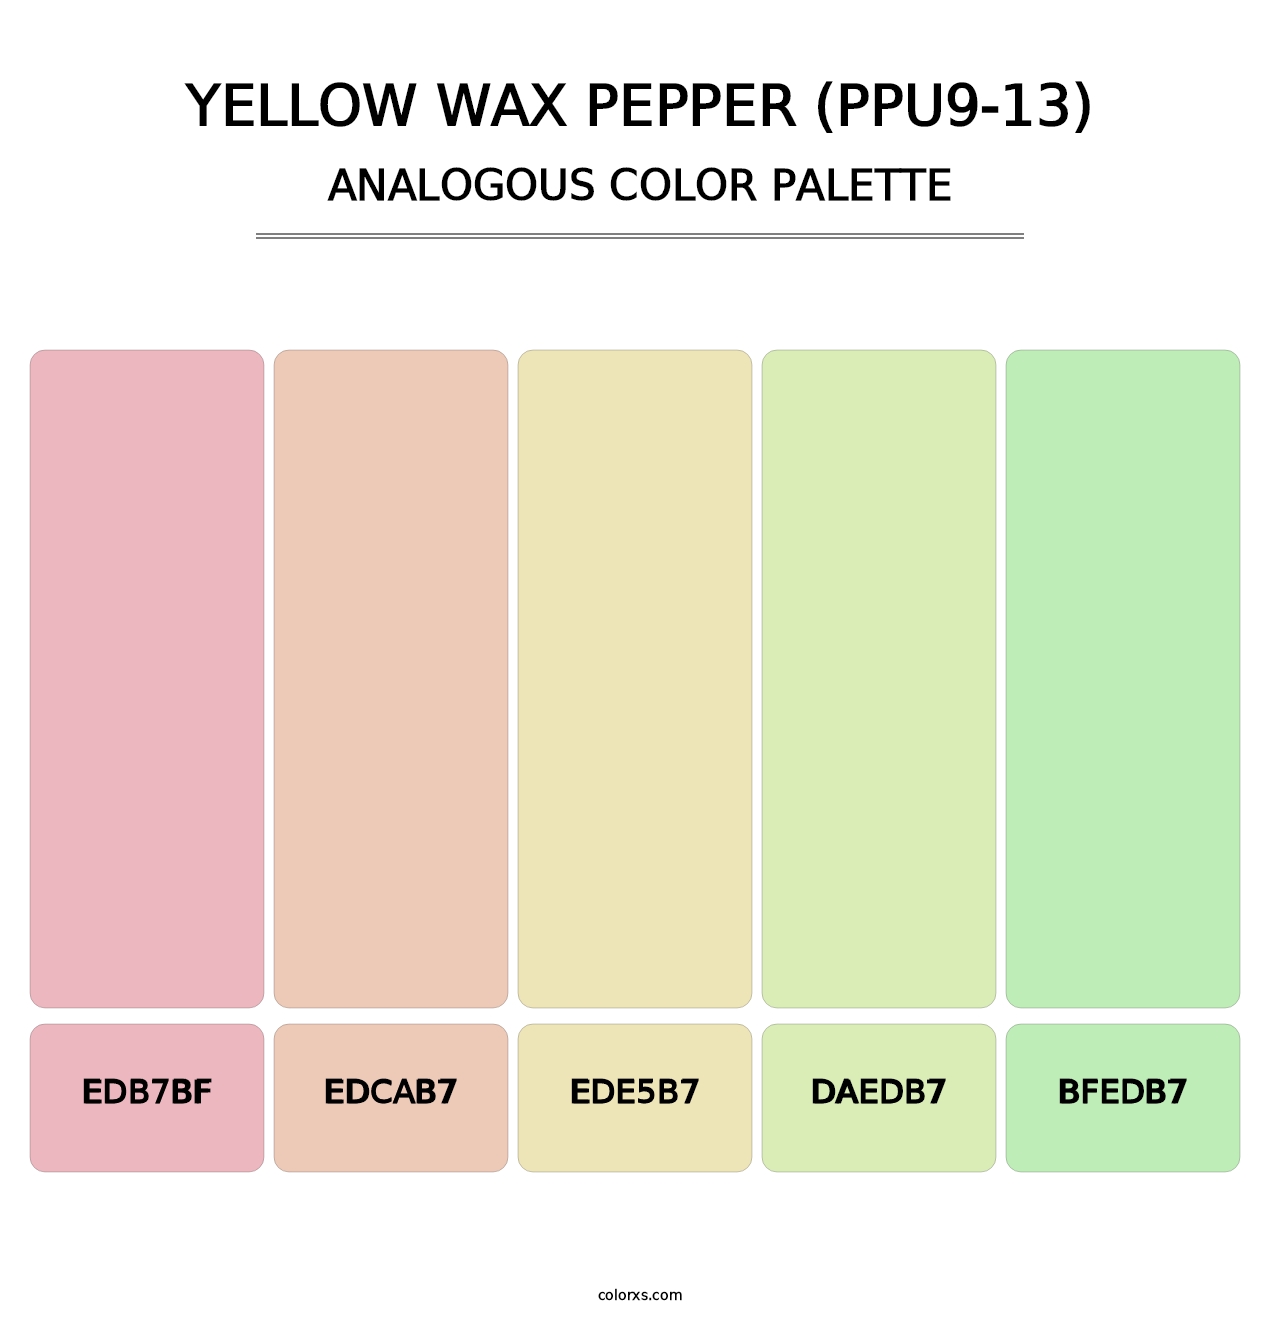 Yellow Wax Pepper (PPU9-13) - Analogous Color Palette